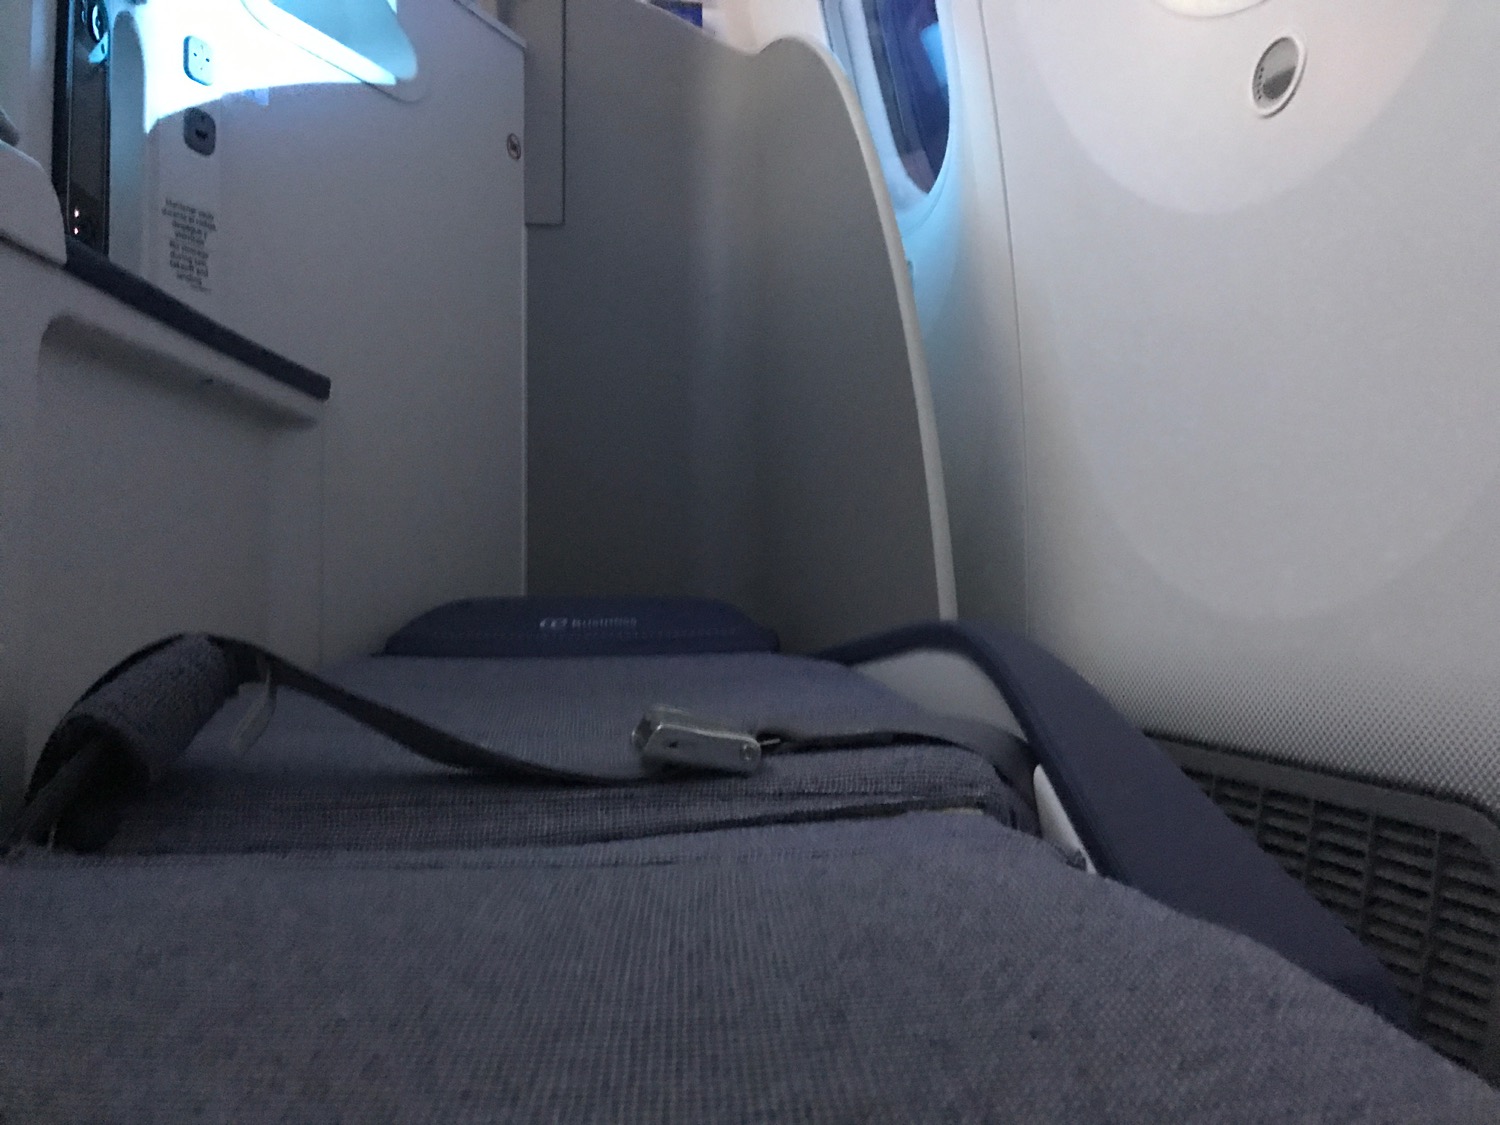 a seat belt on a seat in an airplane